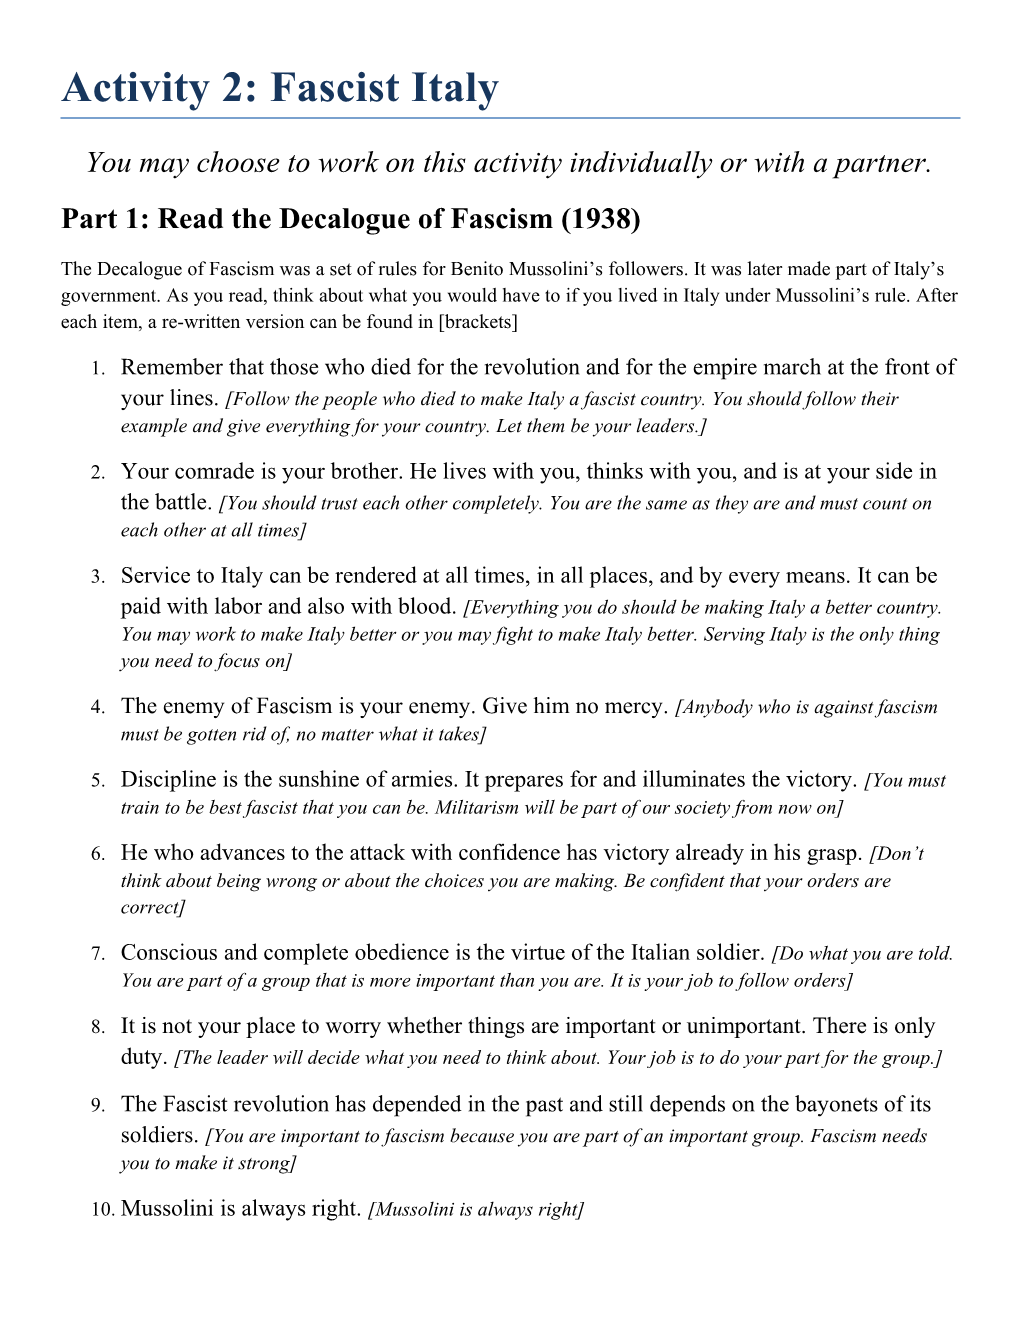 Part 1: Read the Decalogue of Fascism (1938)